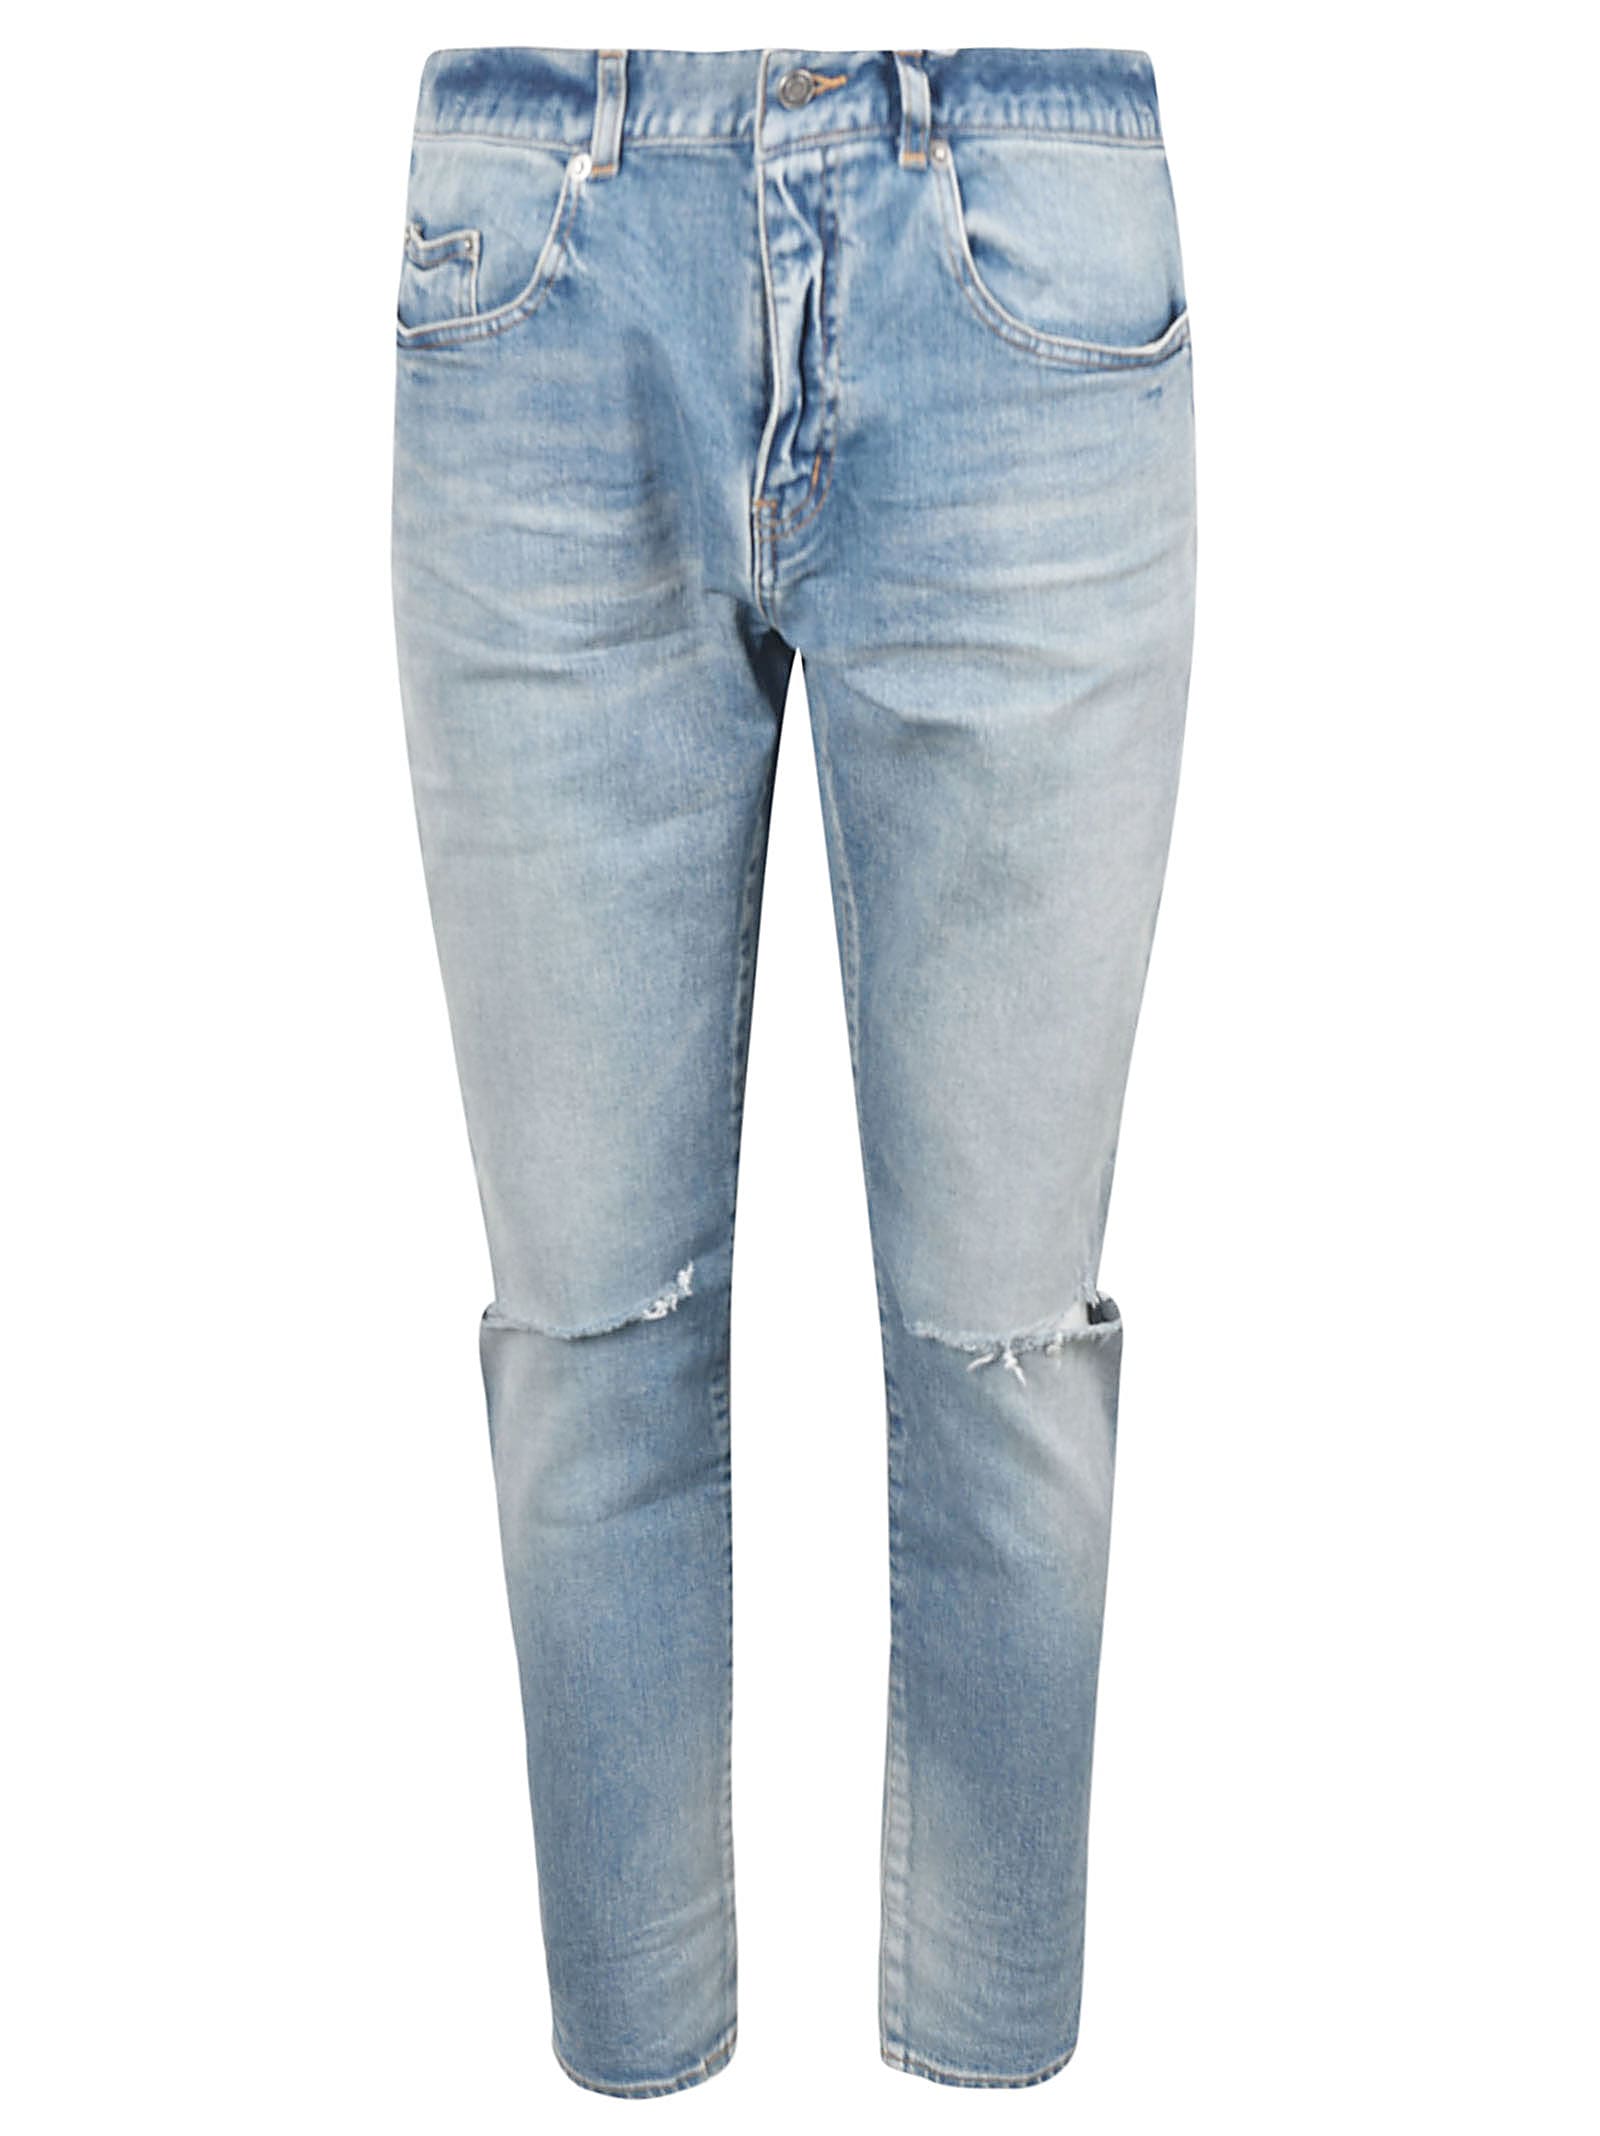 Saint Laurent Ripped Classic Jeans In Bright Blue